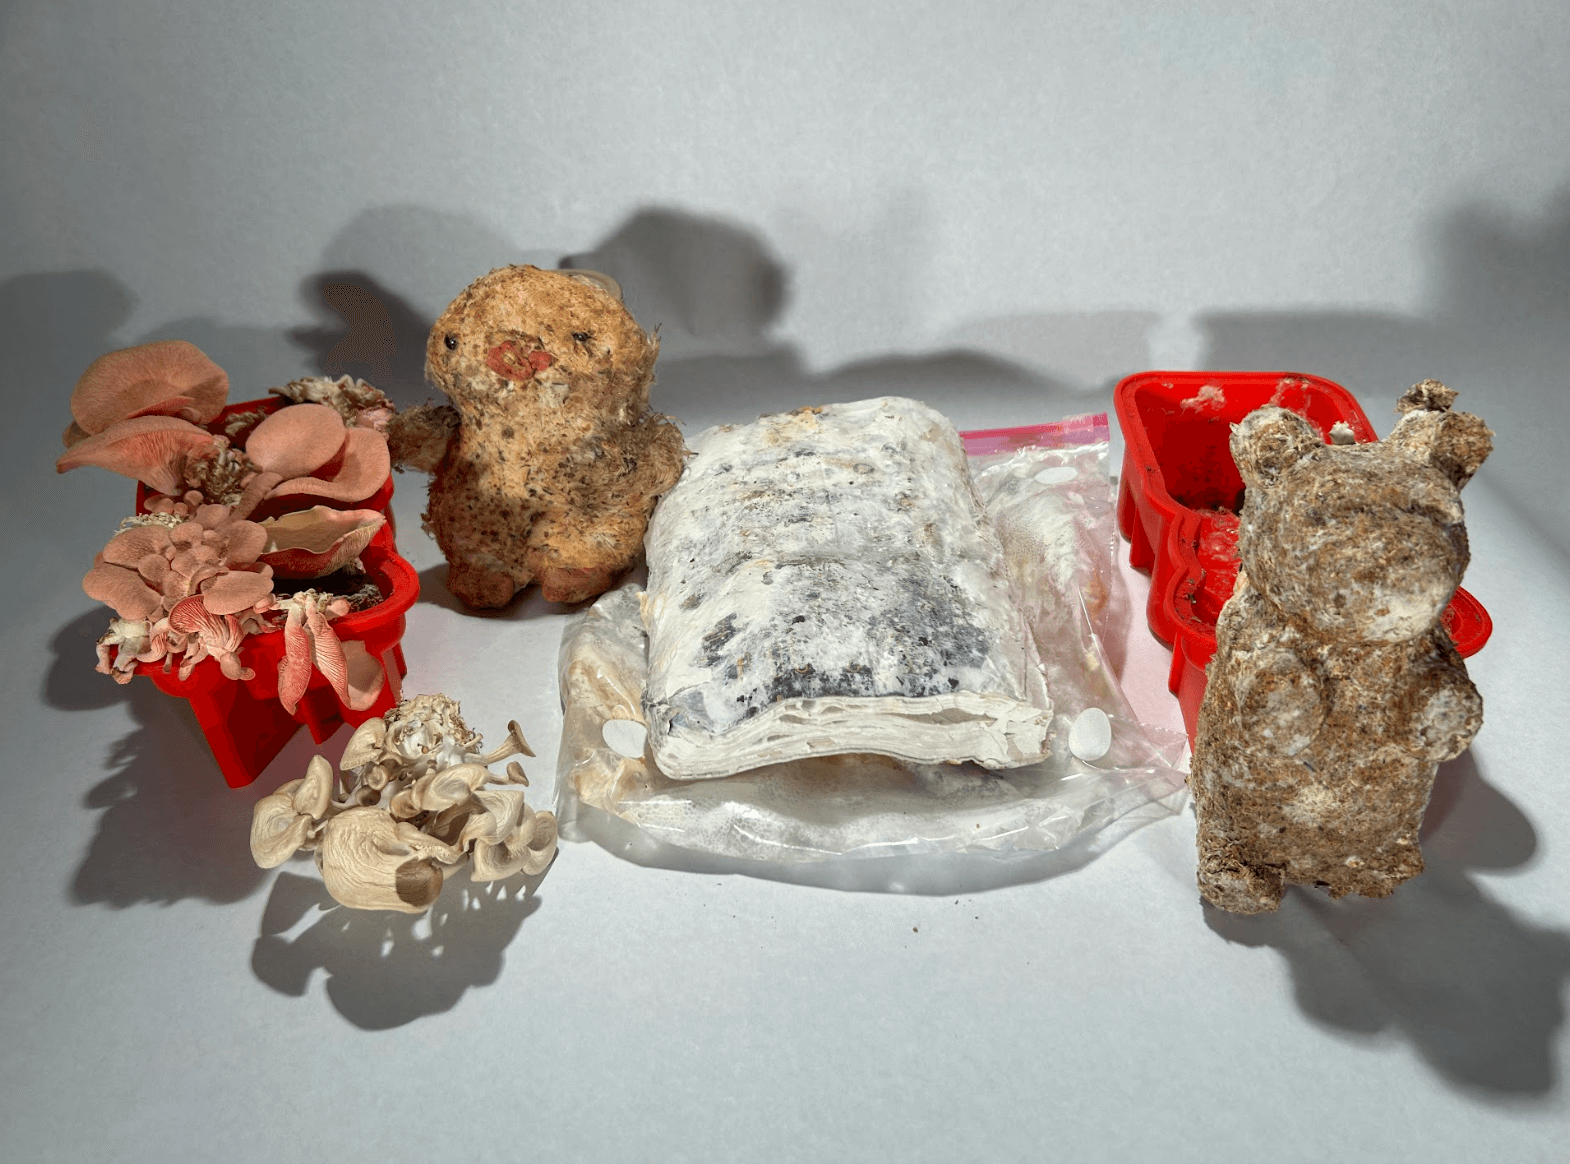 Cultivating Mushrooms in Unconventional Environments